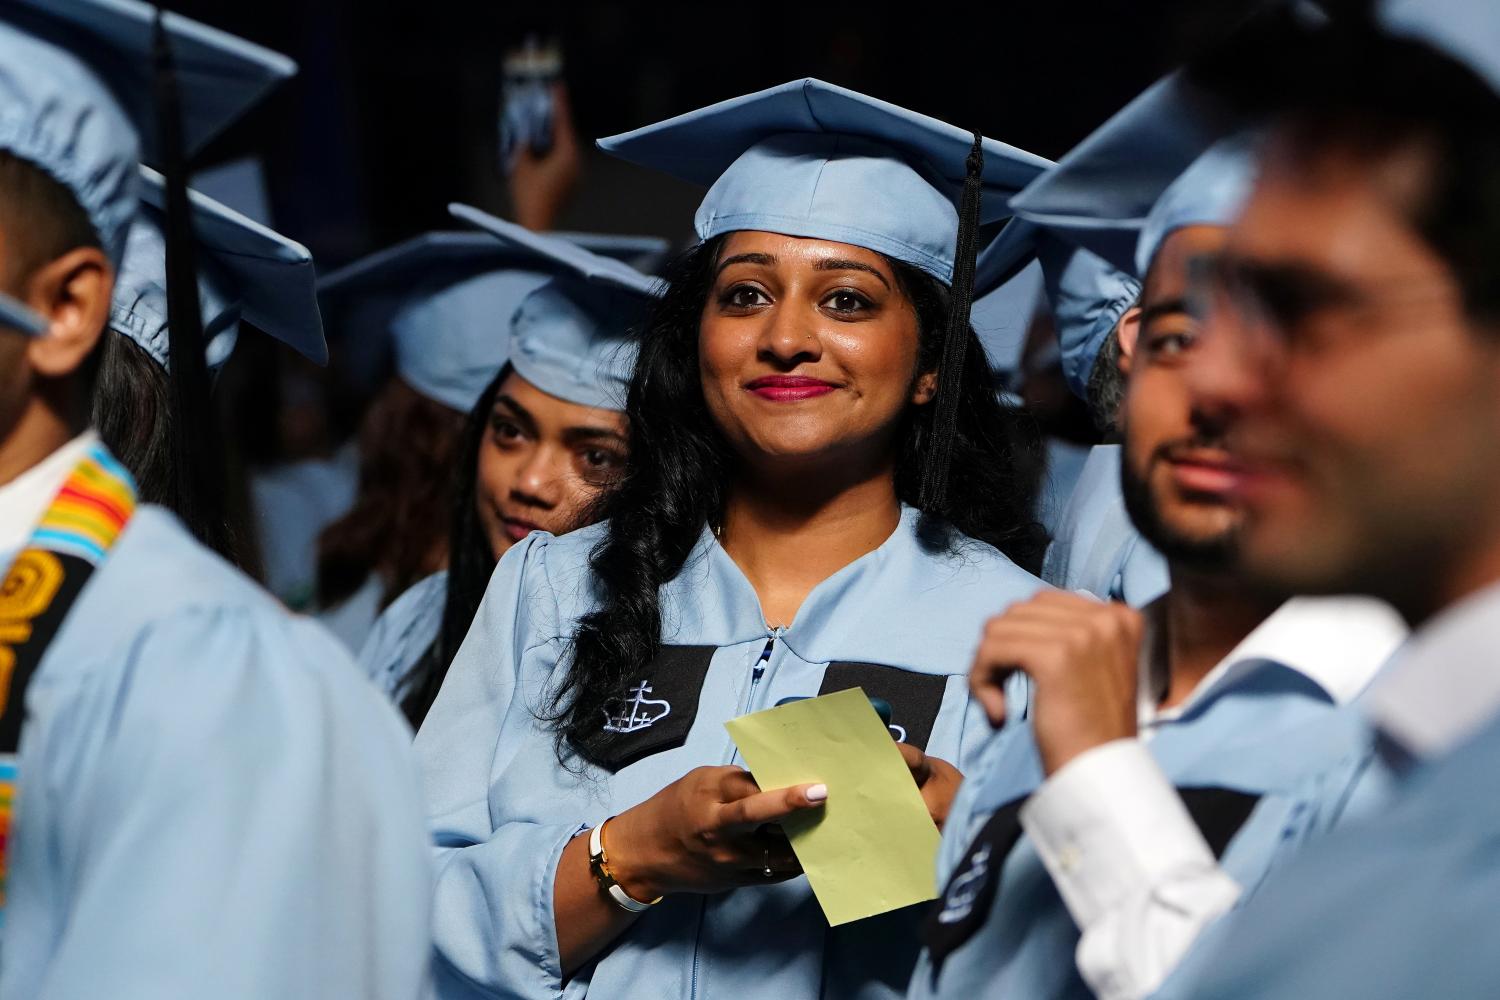 A student looks at the crowd during commencement at the Mailman School of Public Health at Columbia University in the Manhattan borough of New York, New York, U.S., May 21, 2019. REUTERS/Carlo Allegri - RC15A141E400